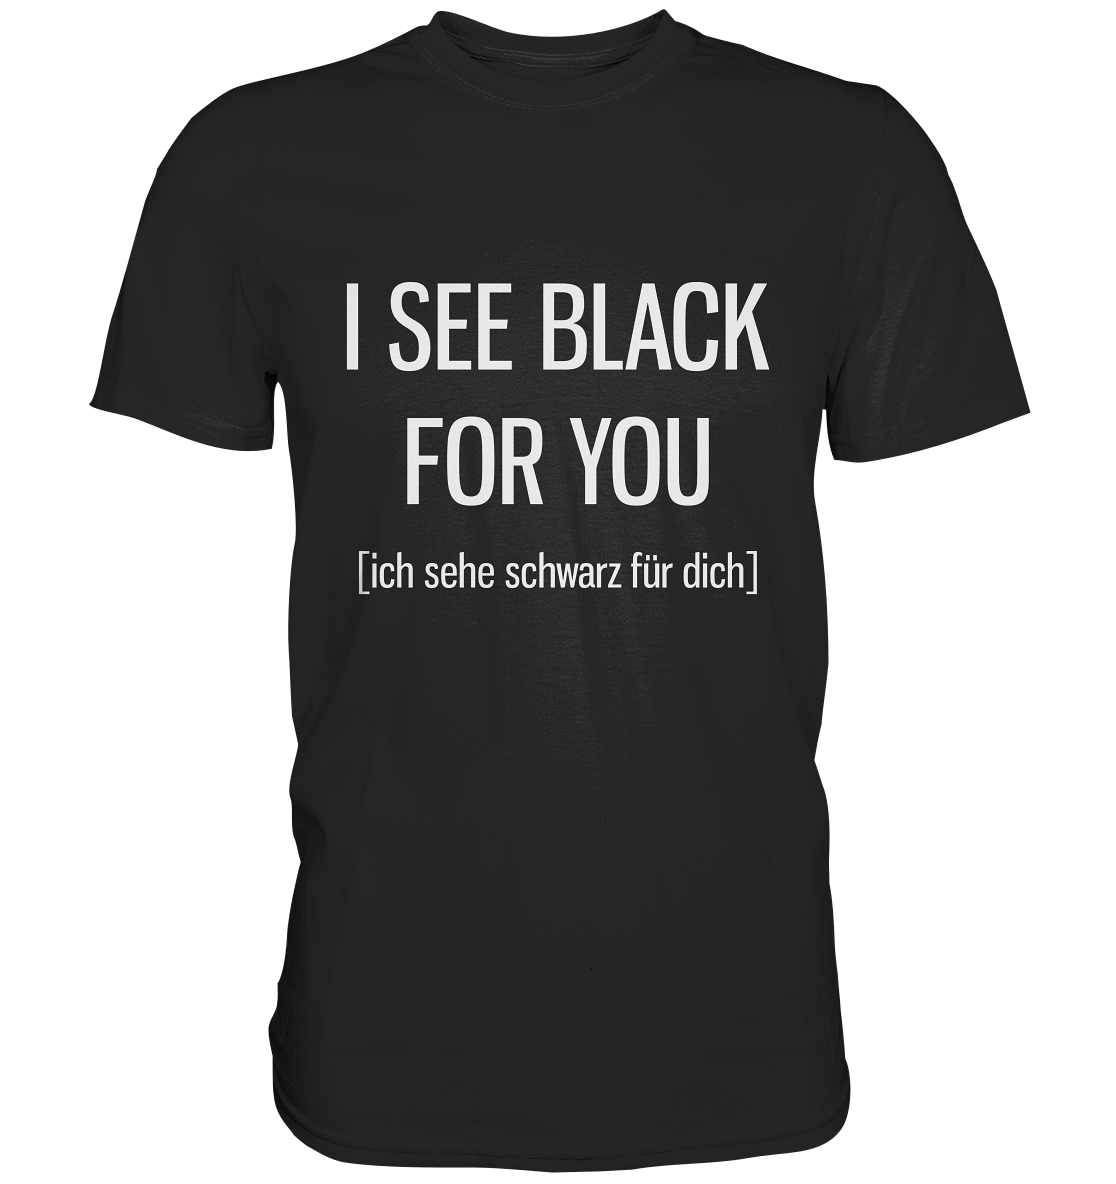 I see black for you. Englisch - Unisex Premium Shirt